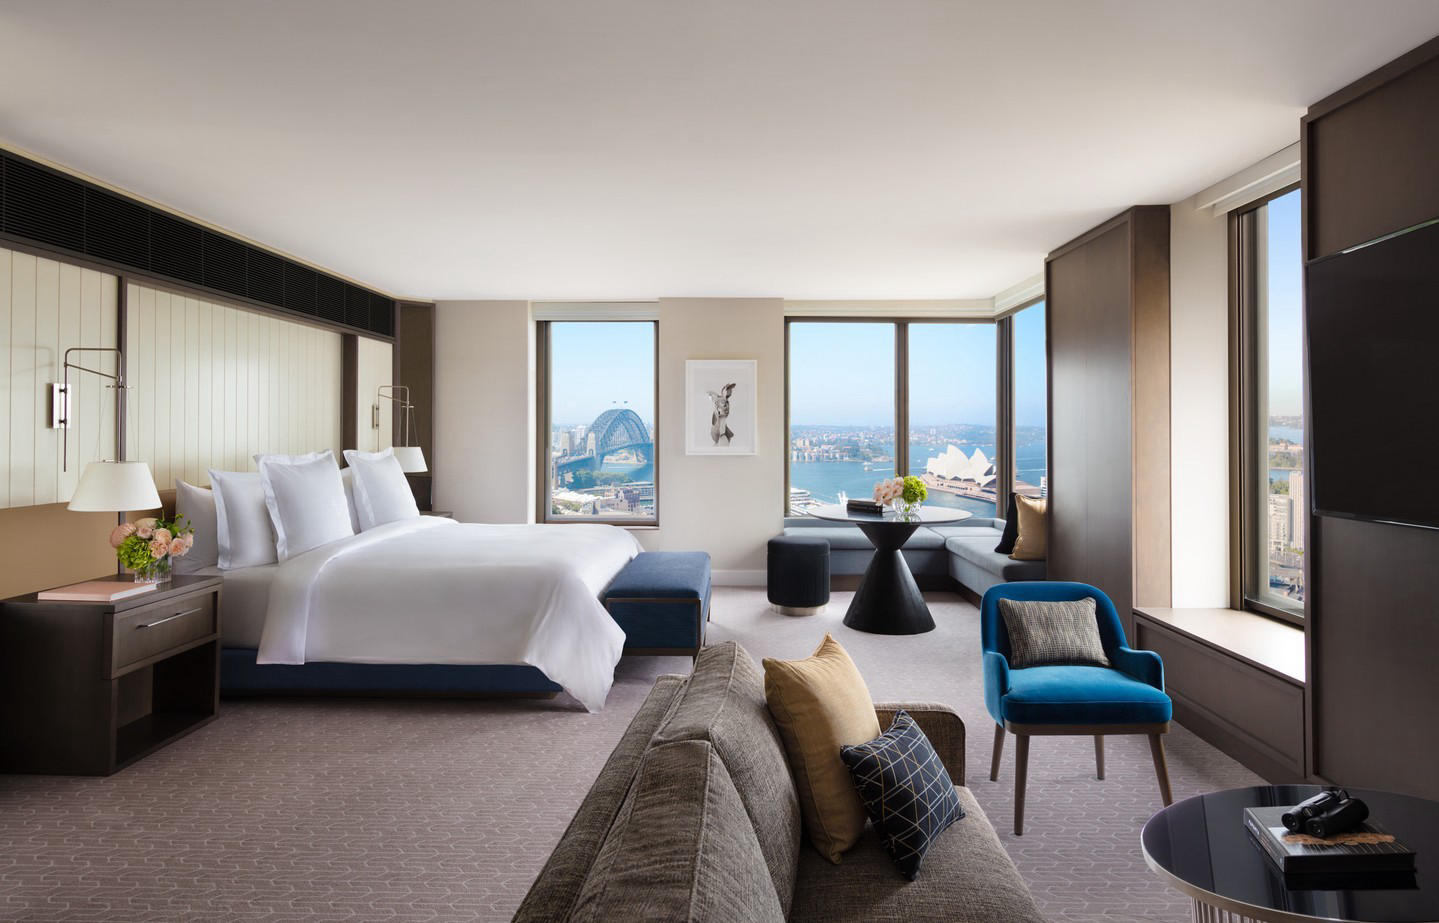 image  1 Four Seasons Hotel Sydney - We're thrilled to be selected as a Card Member Favourites for the #Ameri